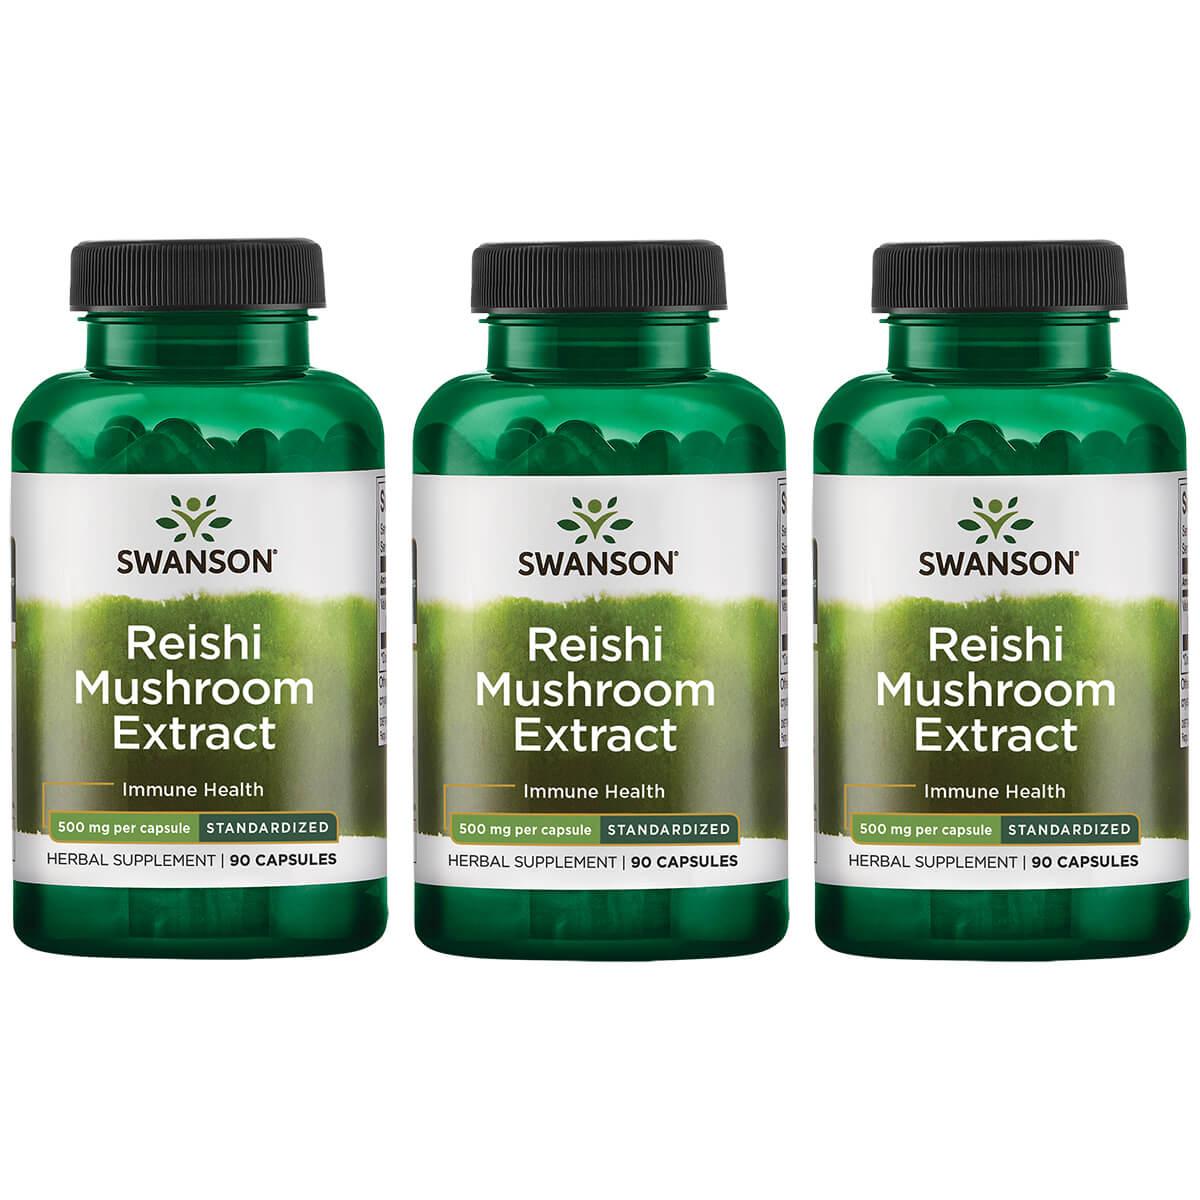 Swanson Superior Herbs Reishi Mushroom Extract - Standardized 3 Pack Vitamin 500 mg 90 Caps Herbs and Supplements